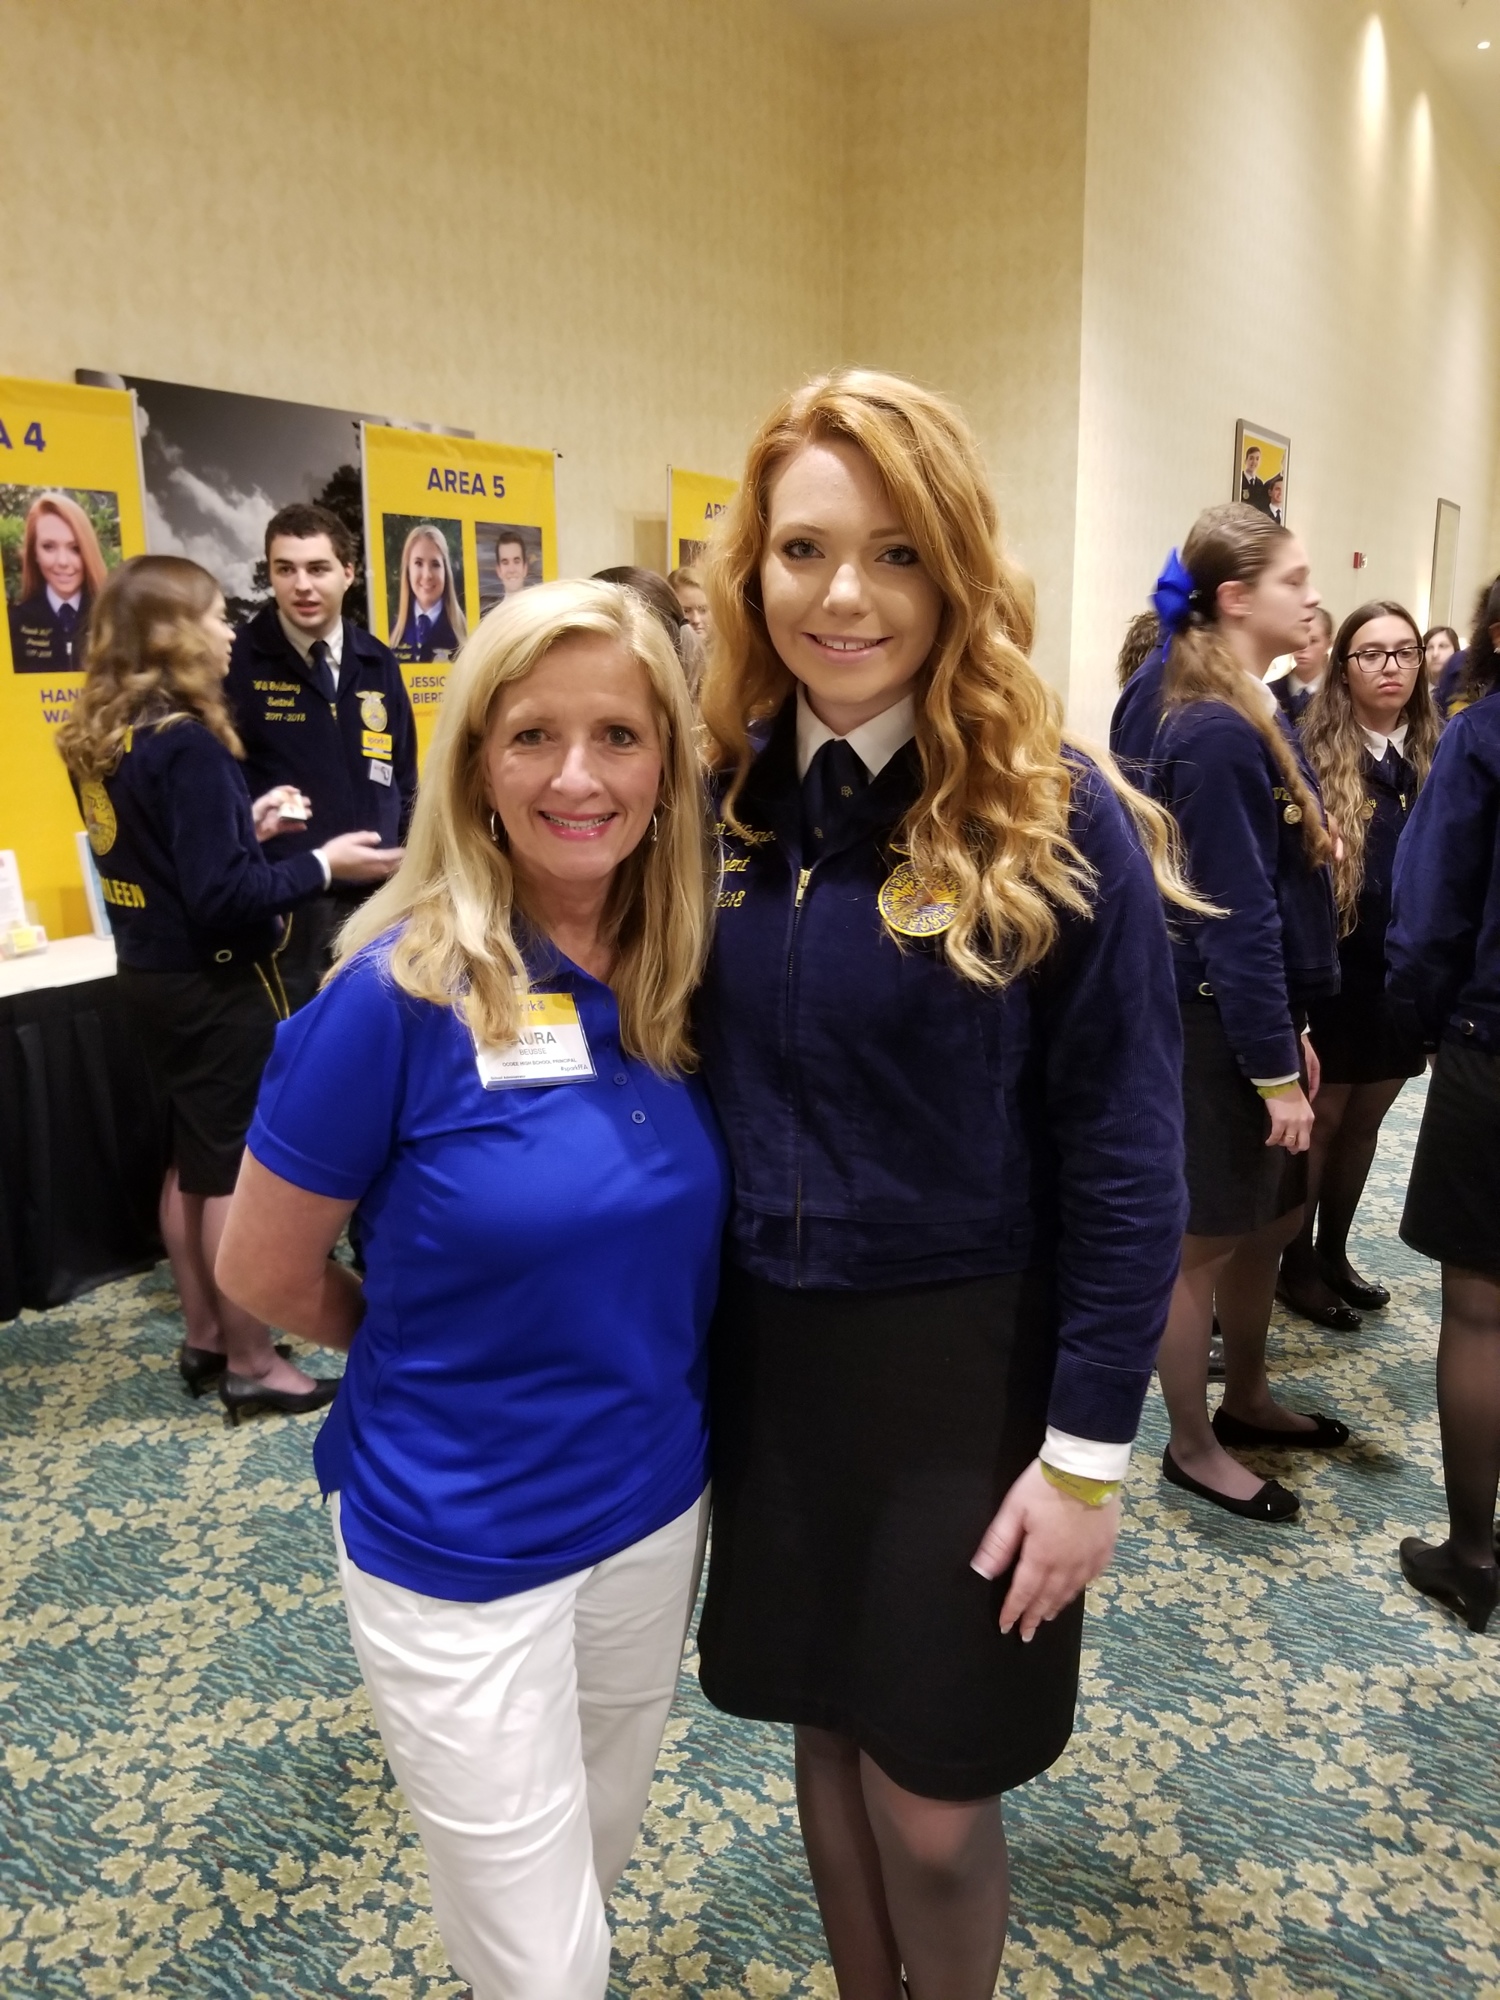 Ocoee High School Principal Laura Beusse congratulates Hannah Wagner after the OHS graduate wins the position of state FFA vice president.